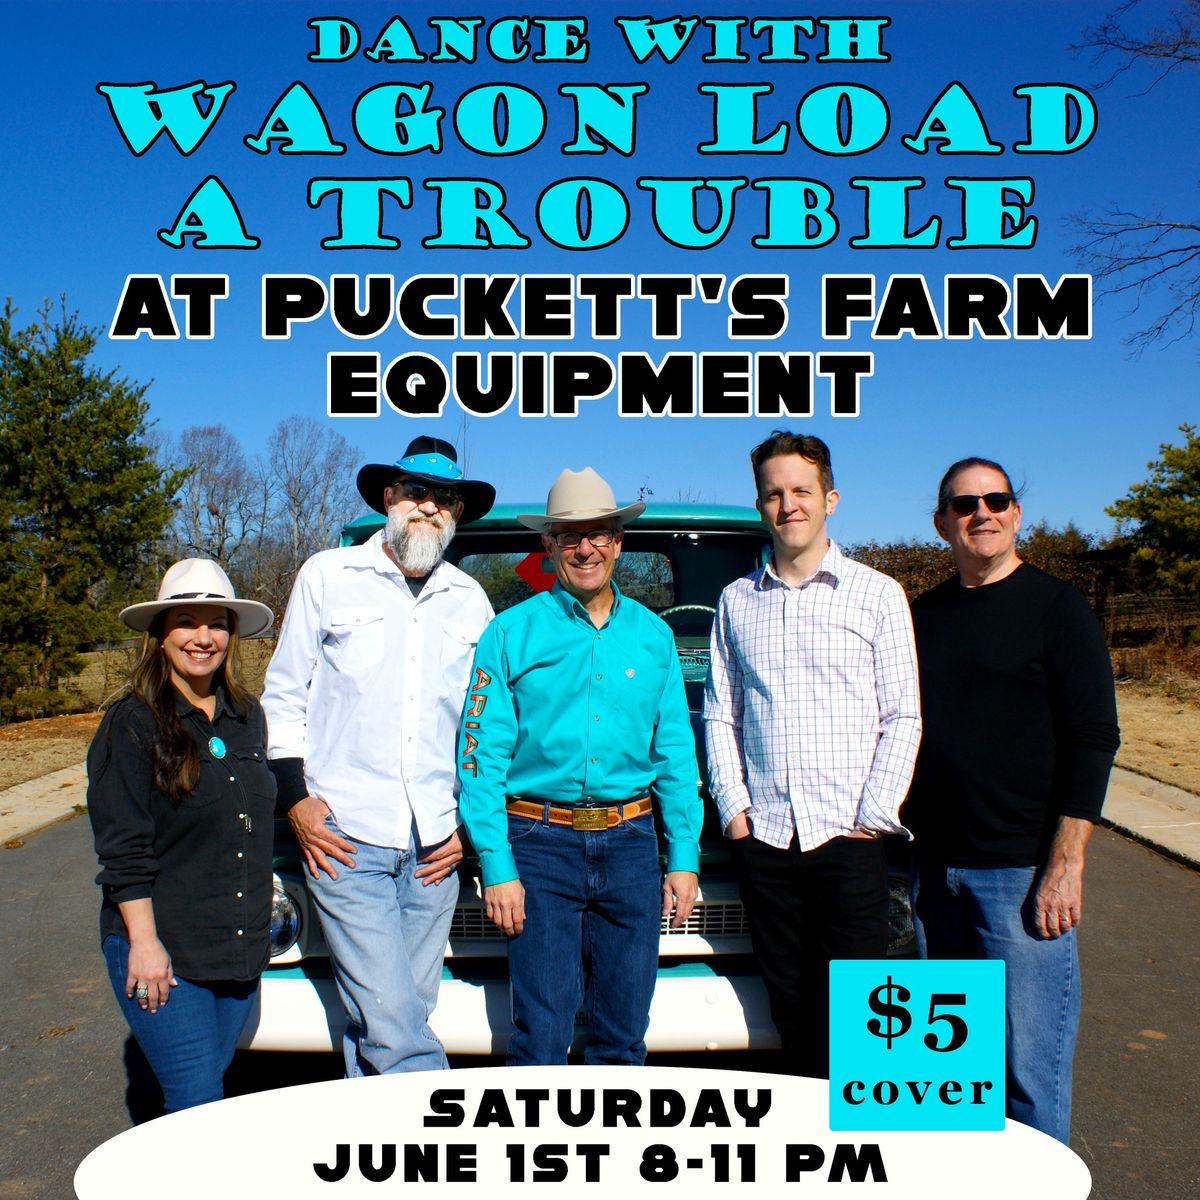 Dance with Wagon Load A Trouble at Puckett's